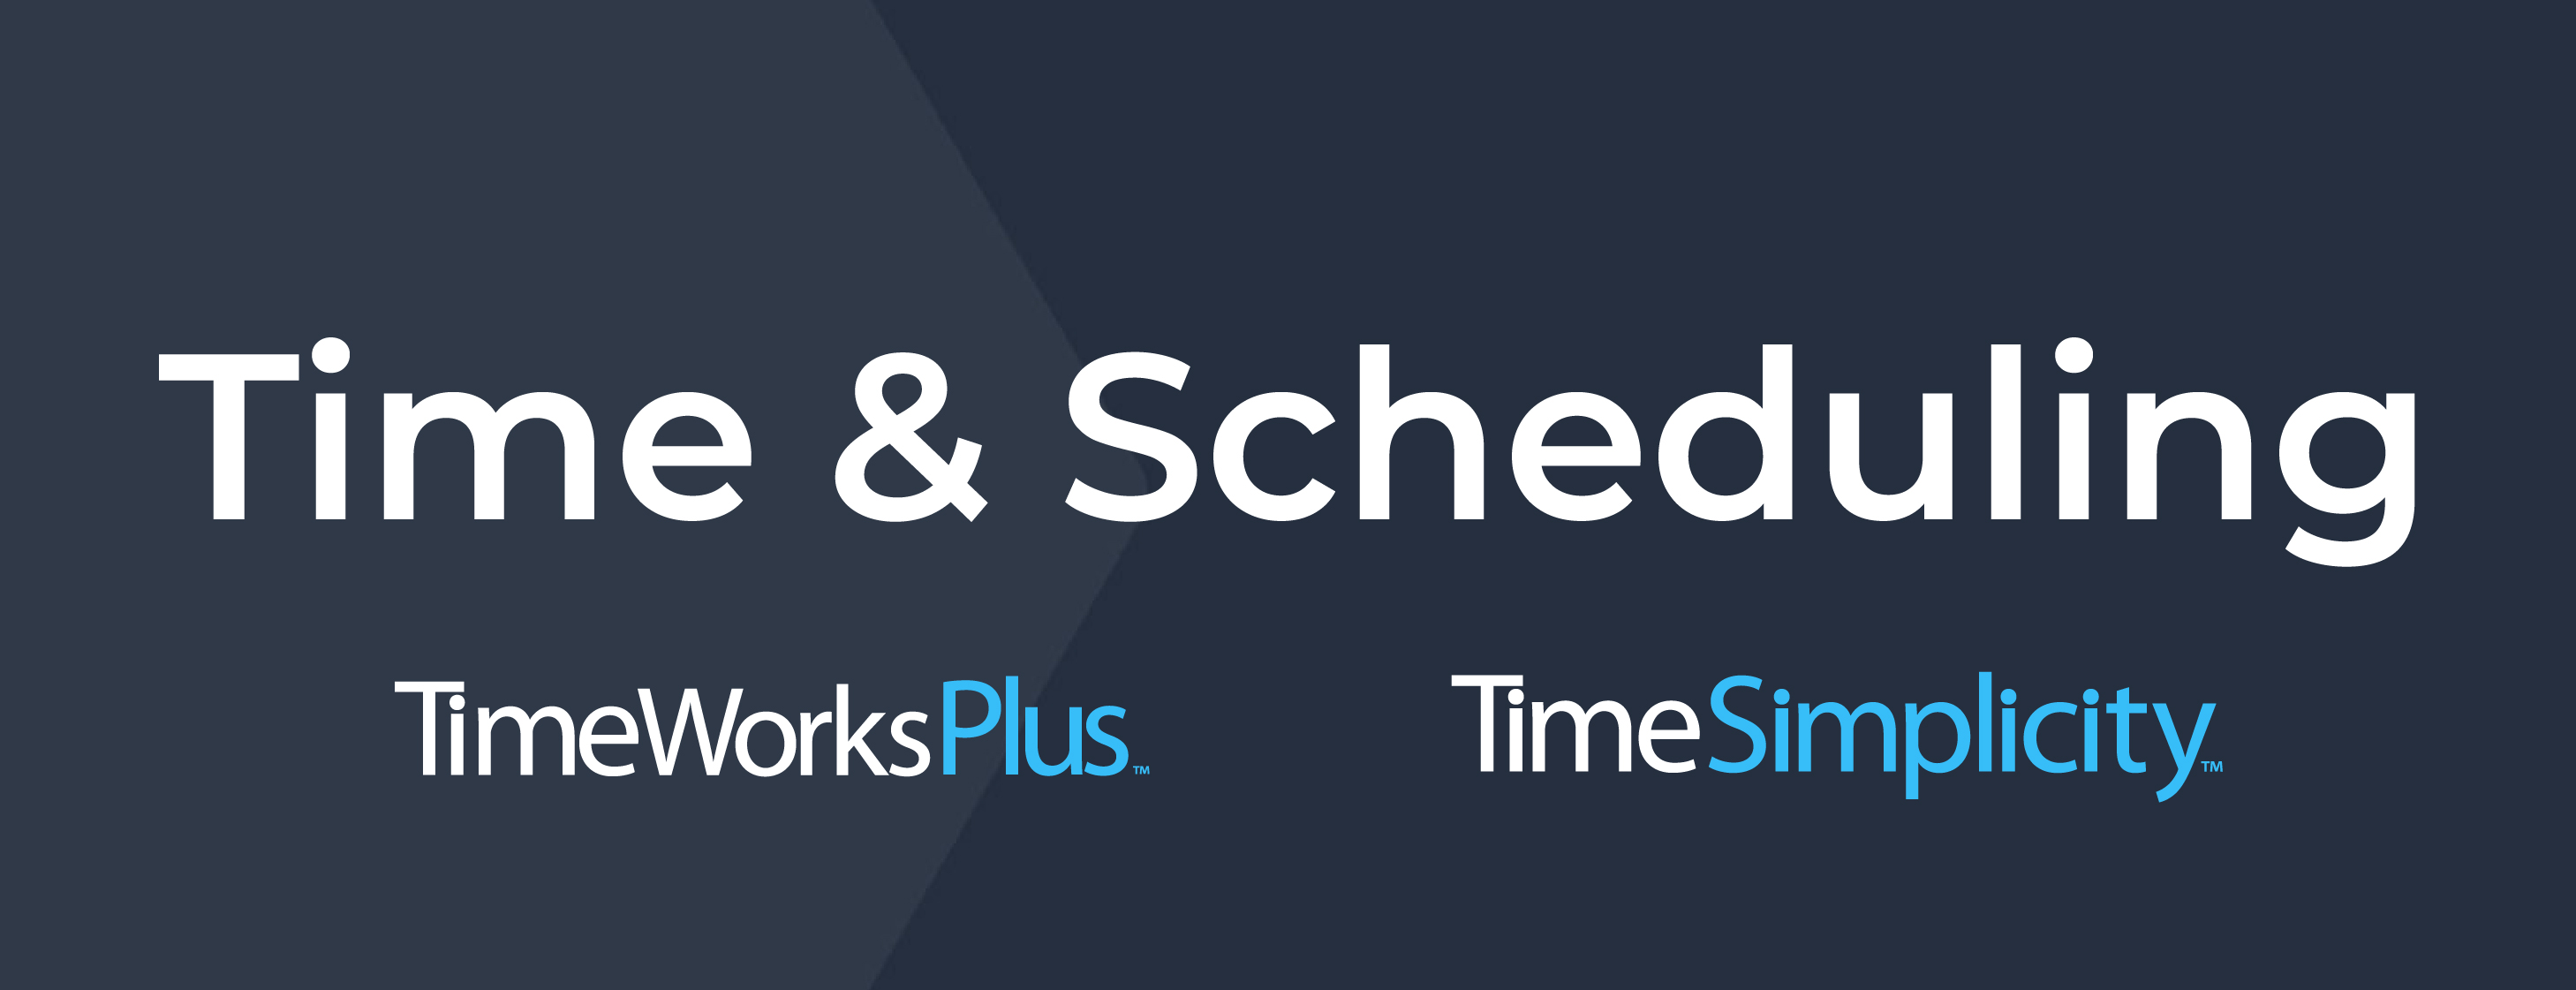 Category-header_Time-Scheduling-01